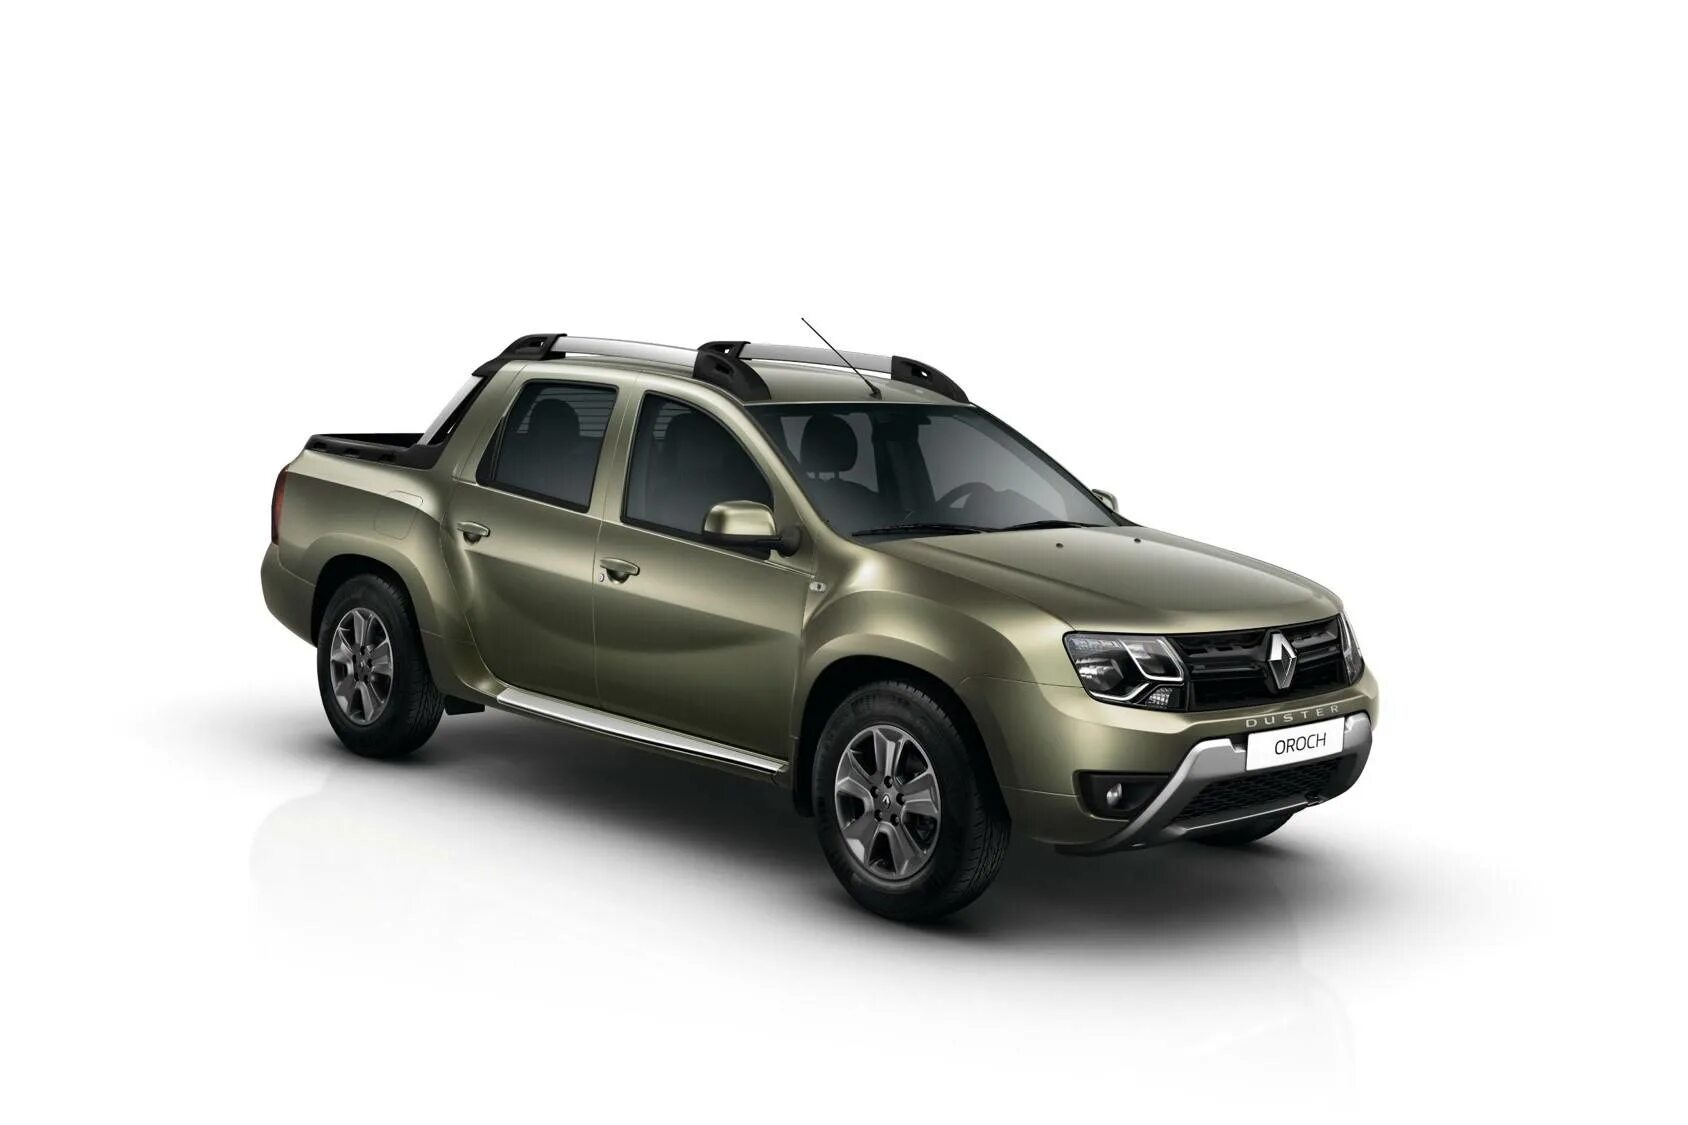 Duster 2. Renault Duster 2.0l. Рено Дастер 142 л с. Renault Duster 2017. Скорость дастера 2.0